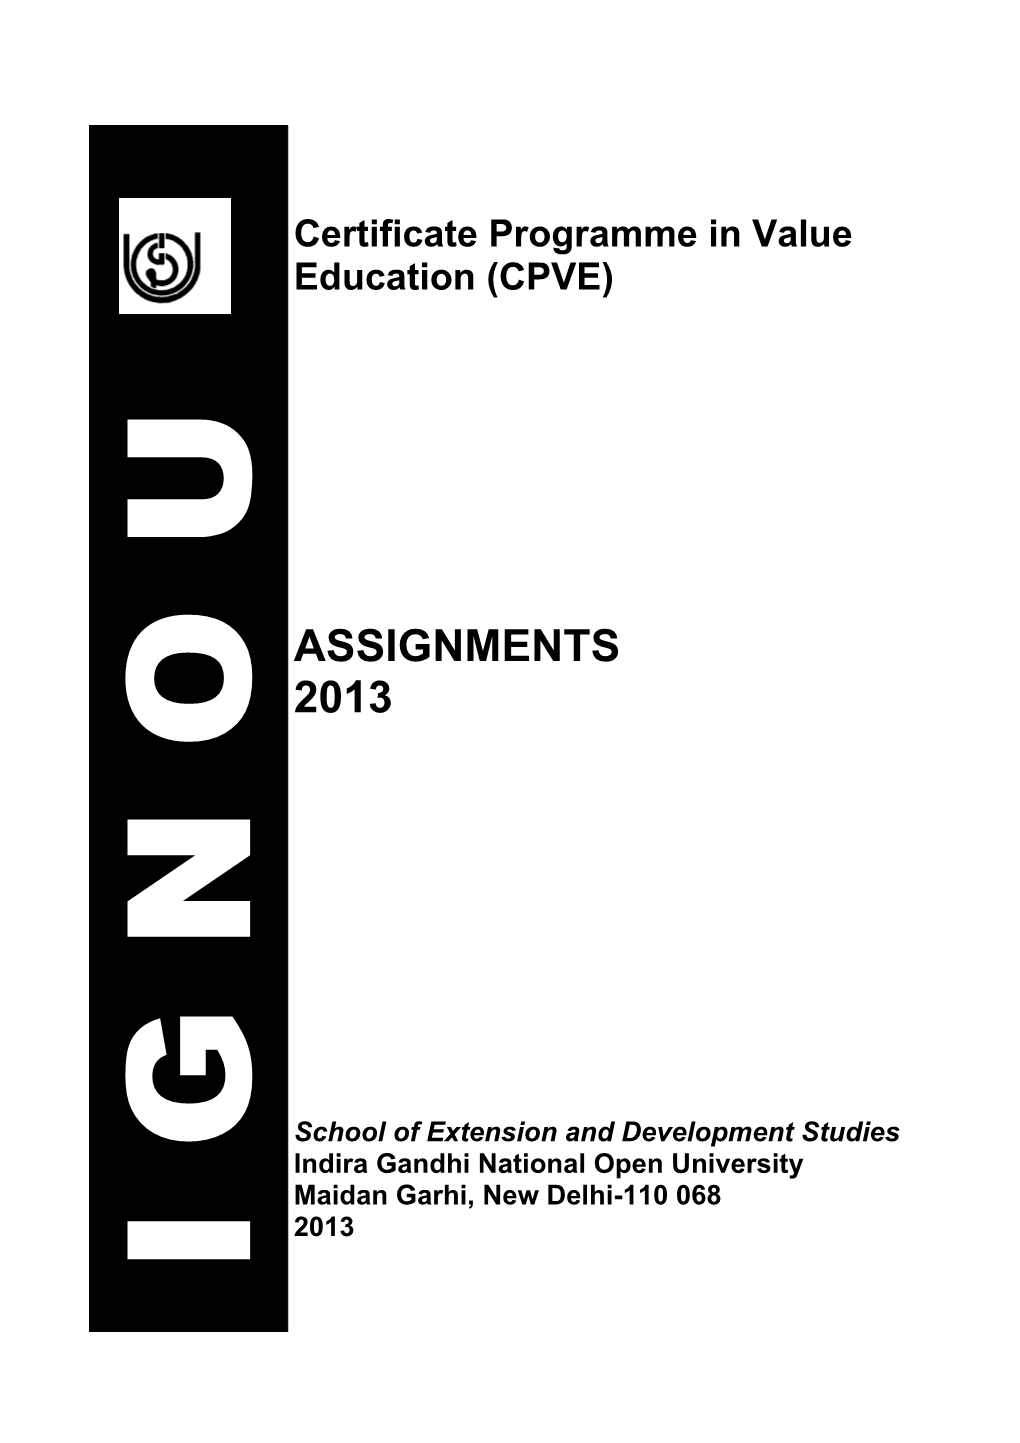 Assignment for Certificate Programme in Value Education (Soeds)